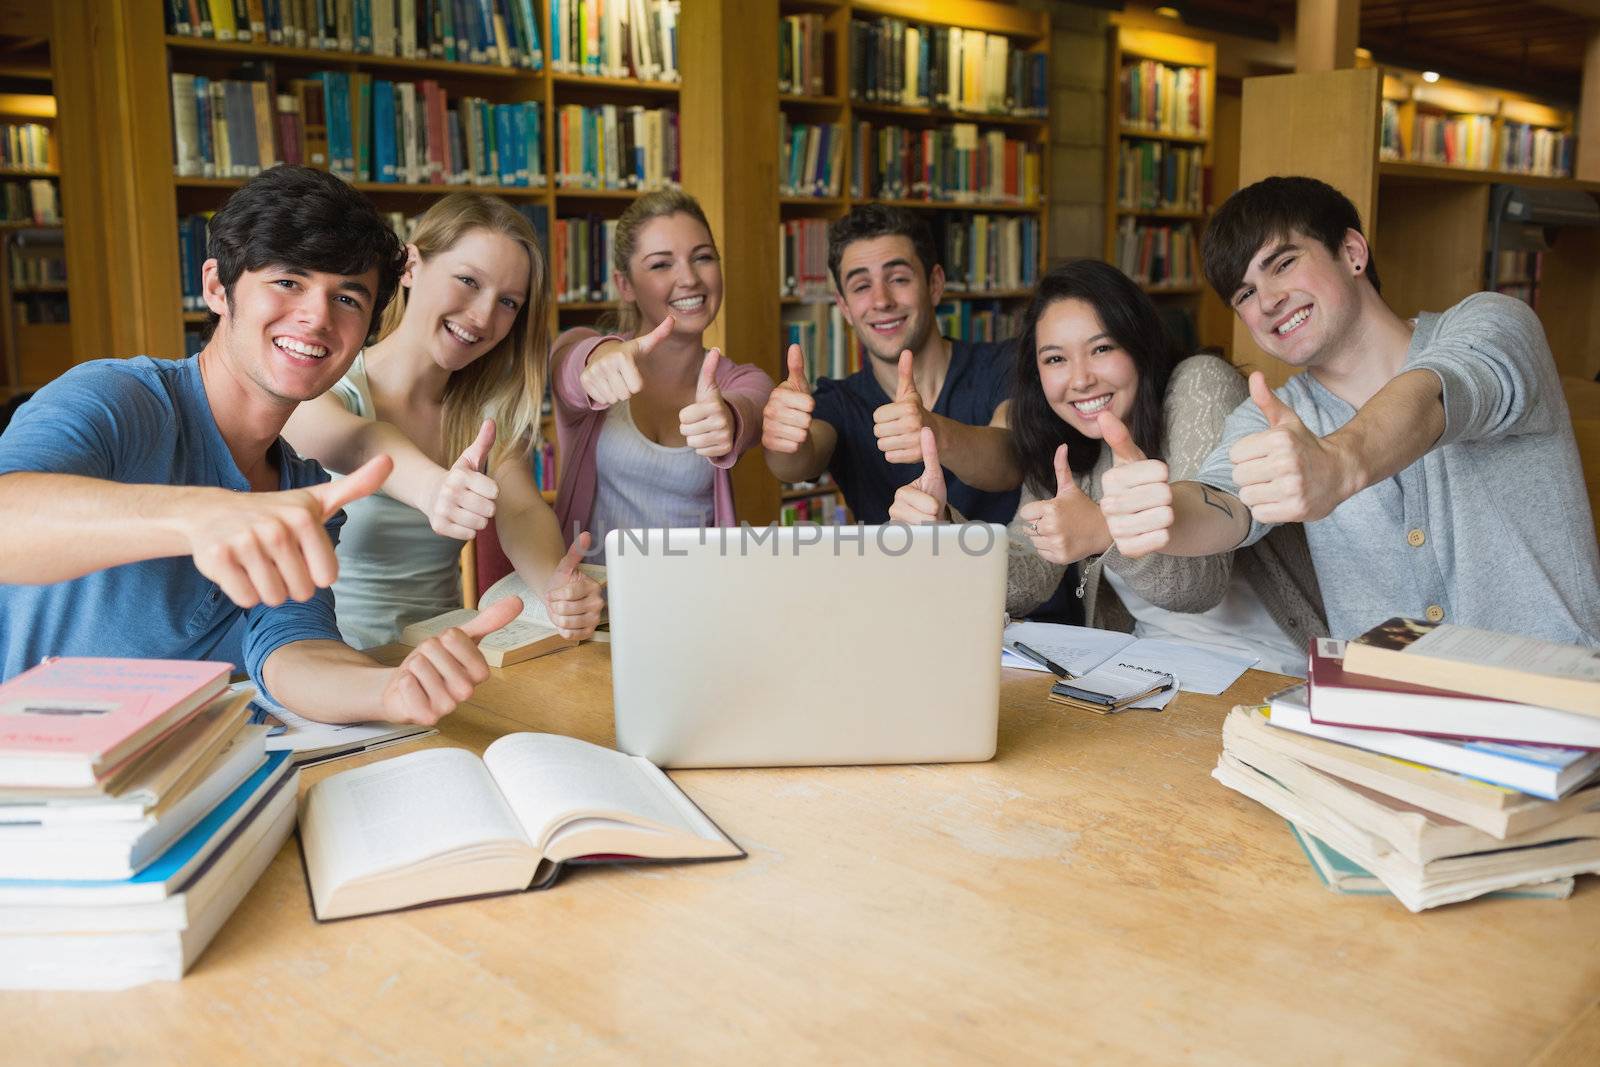 Group of students sitting in a library at a table while using the laptop and giving thumbs up